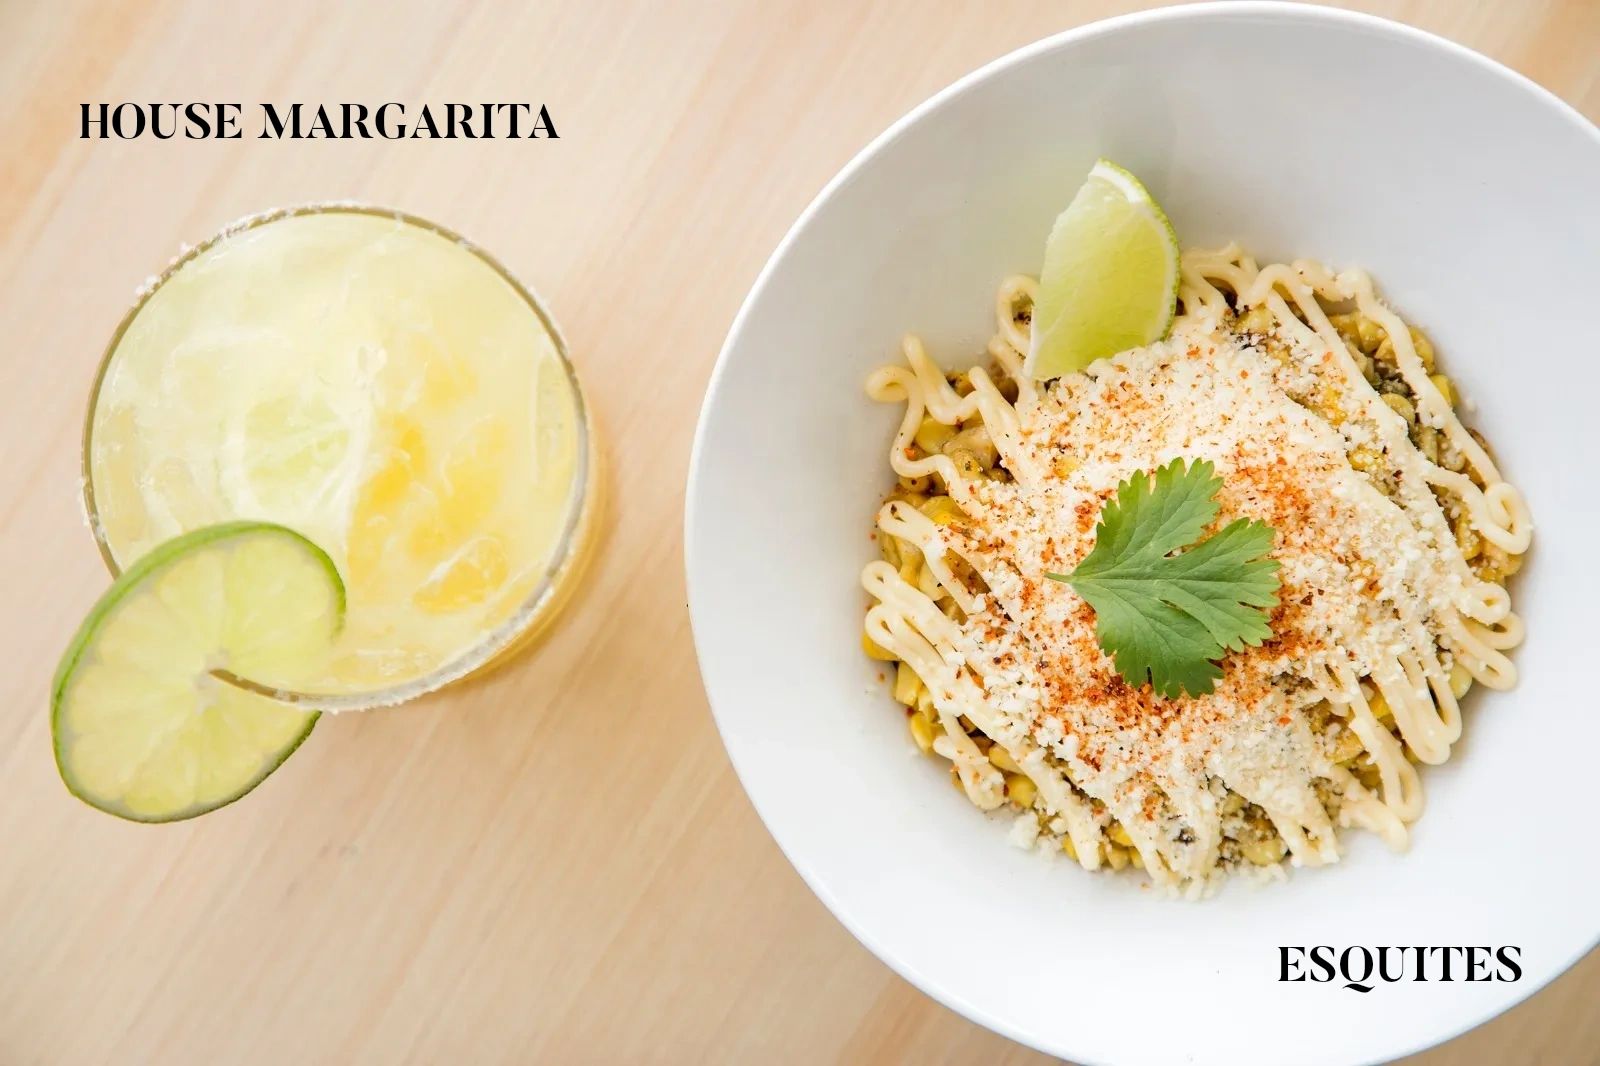 House Margarita and Esquites Mexican Dish 